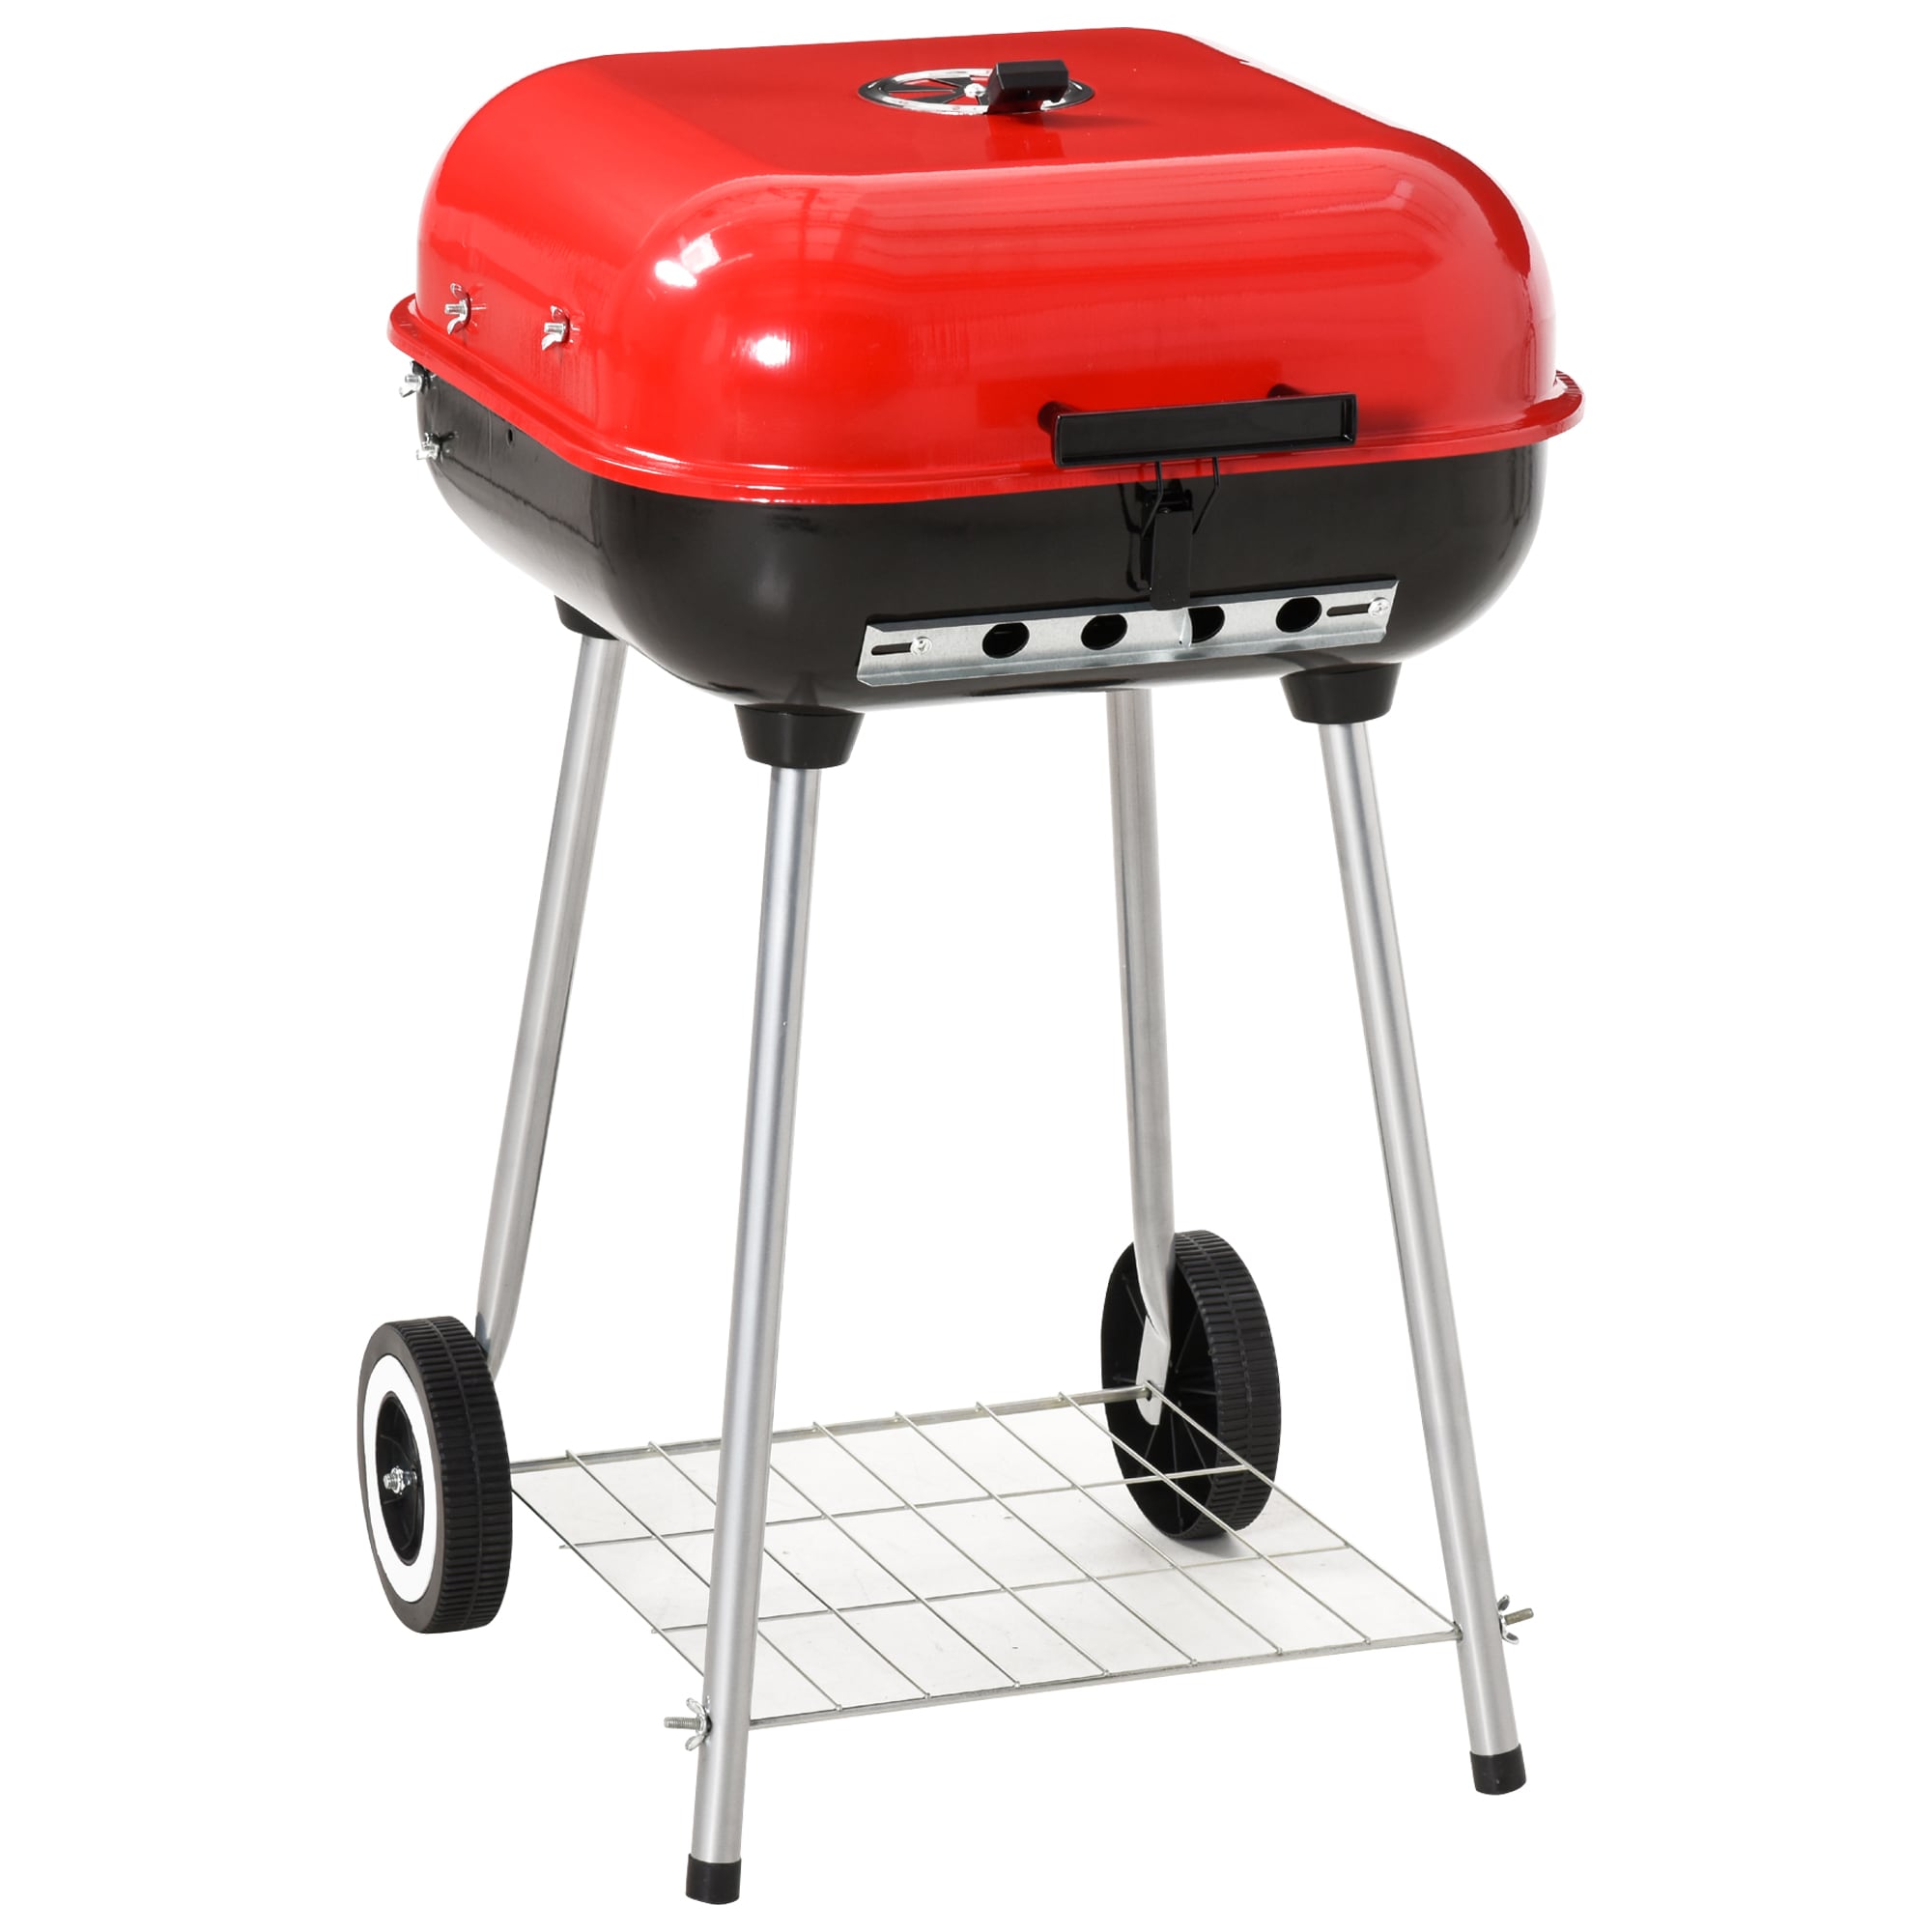 Glimlach Afleiden mezelf Outsunny 17.75-in W Red Charcoal Grill in the Charcoal Grills department at  Lowes.com